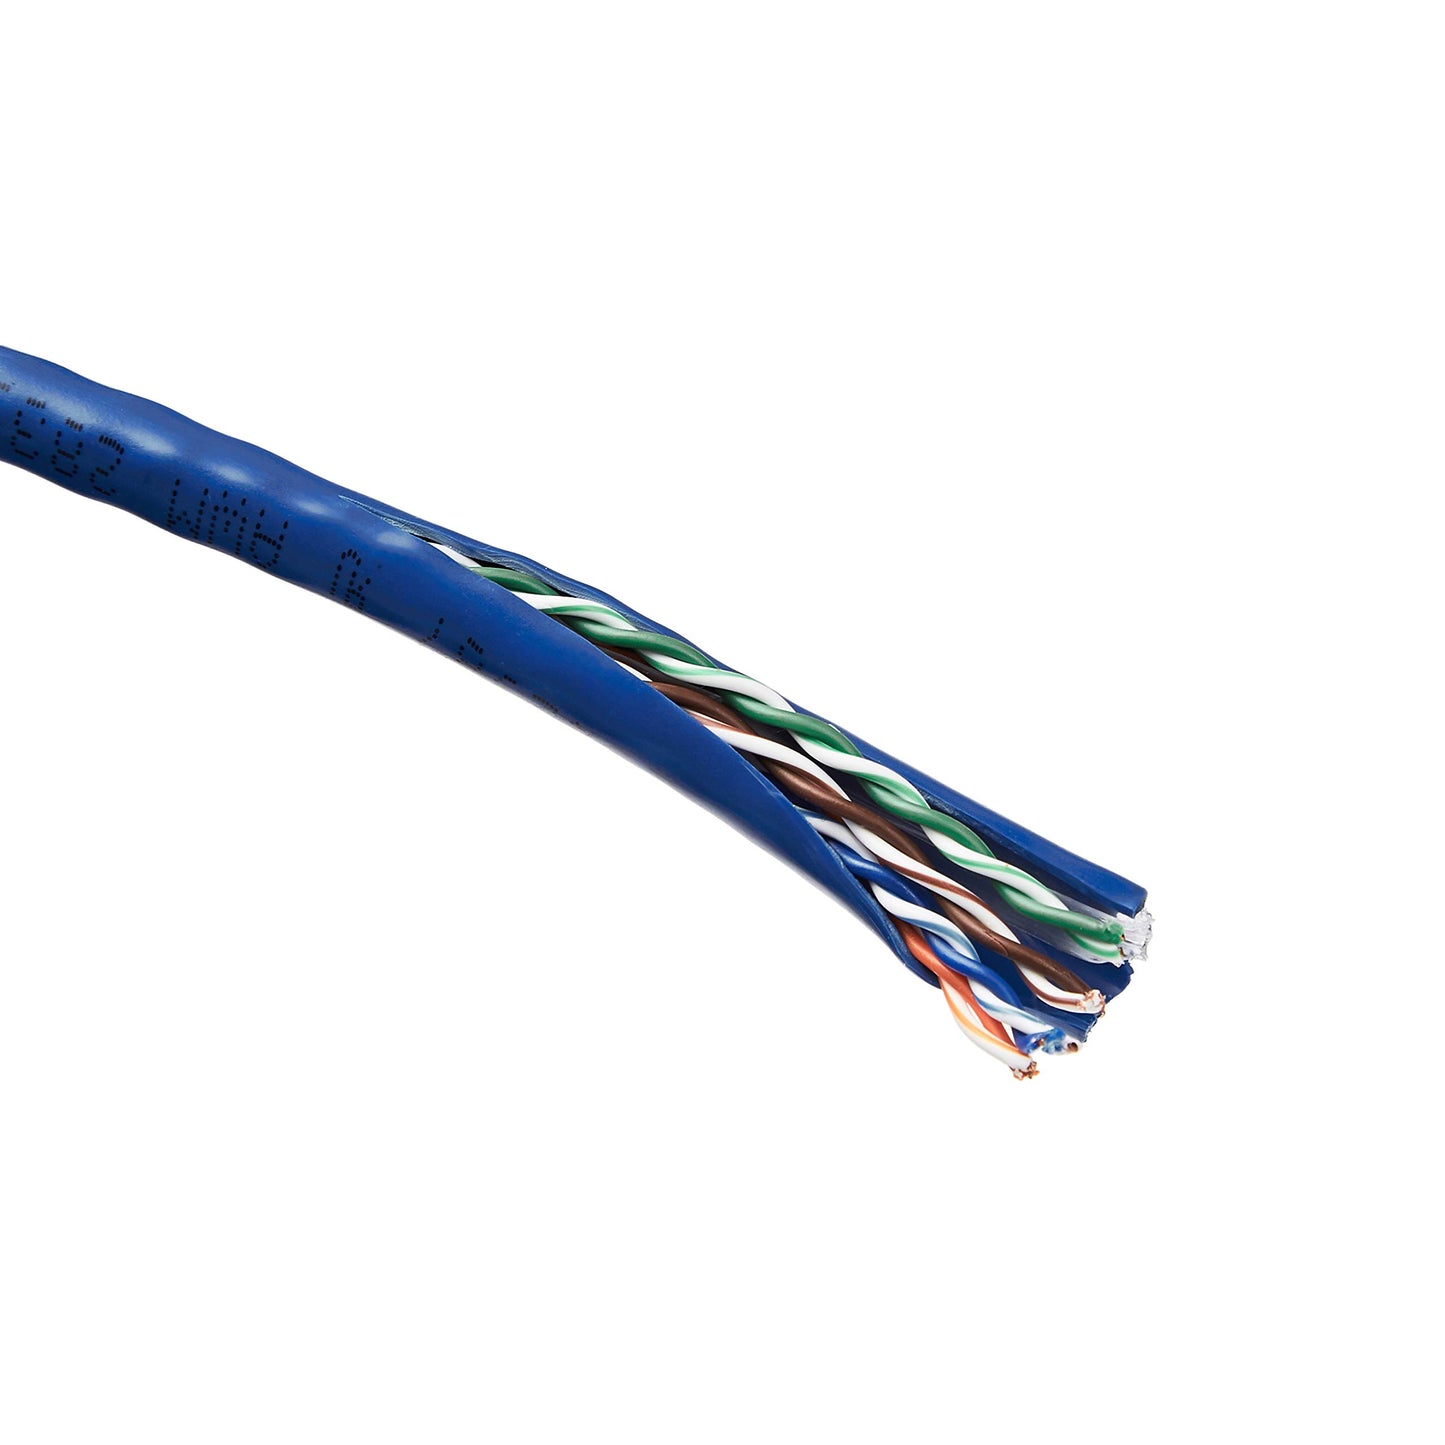 Totality Depot Cat6 Ethernet Solid Bulk Cable (23 AWG, UTP) - 1000-Foot, Blue